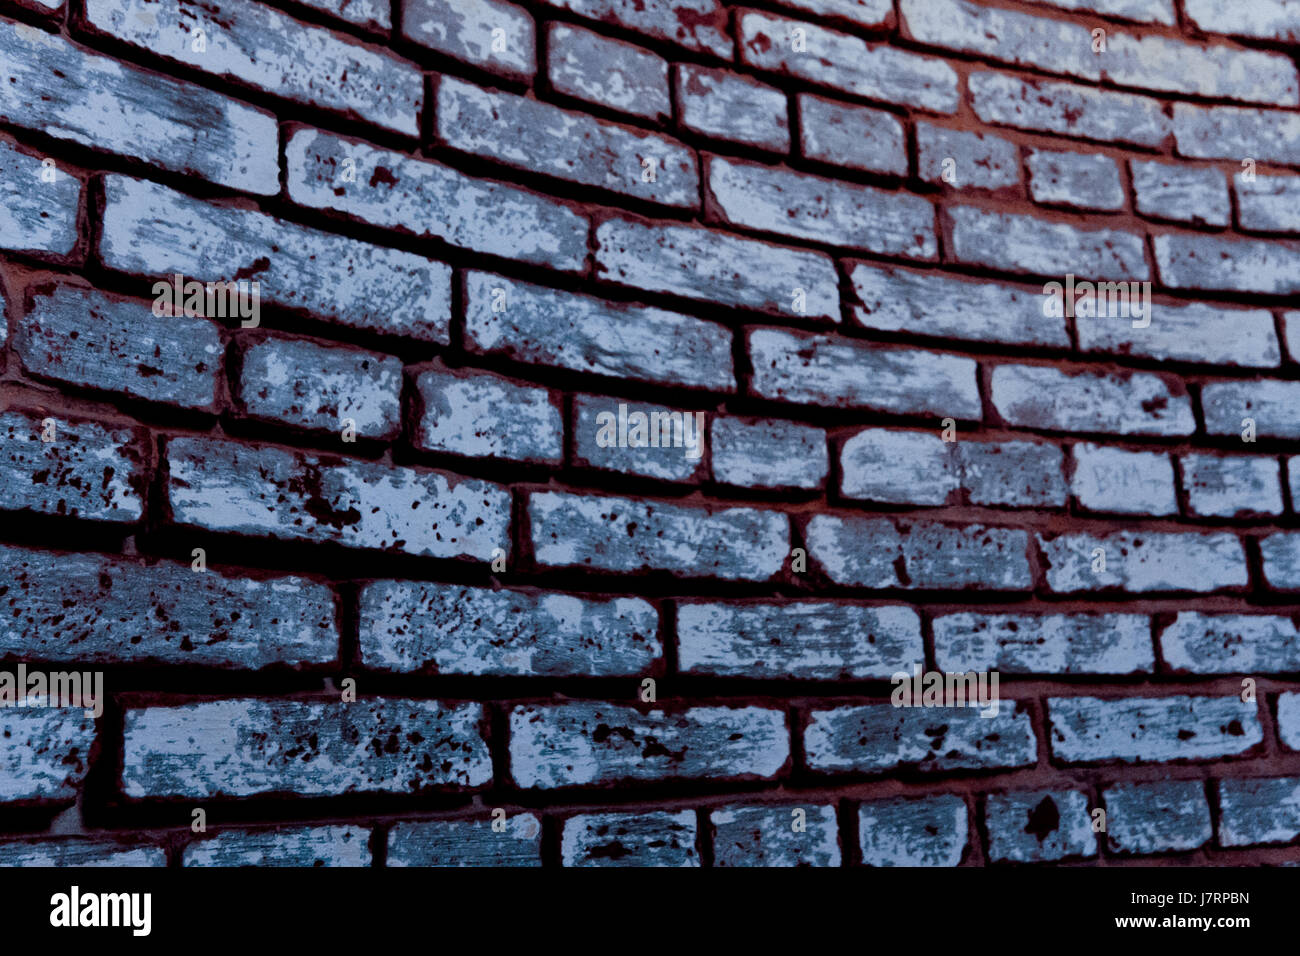 Lighthouse Blue and Red Brick Walls Stock Photo